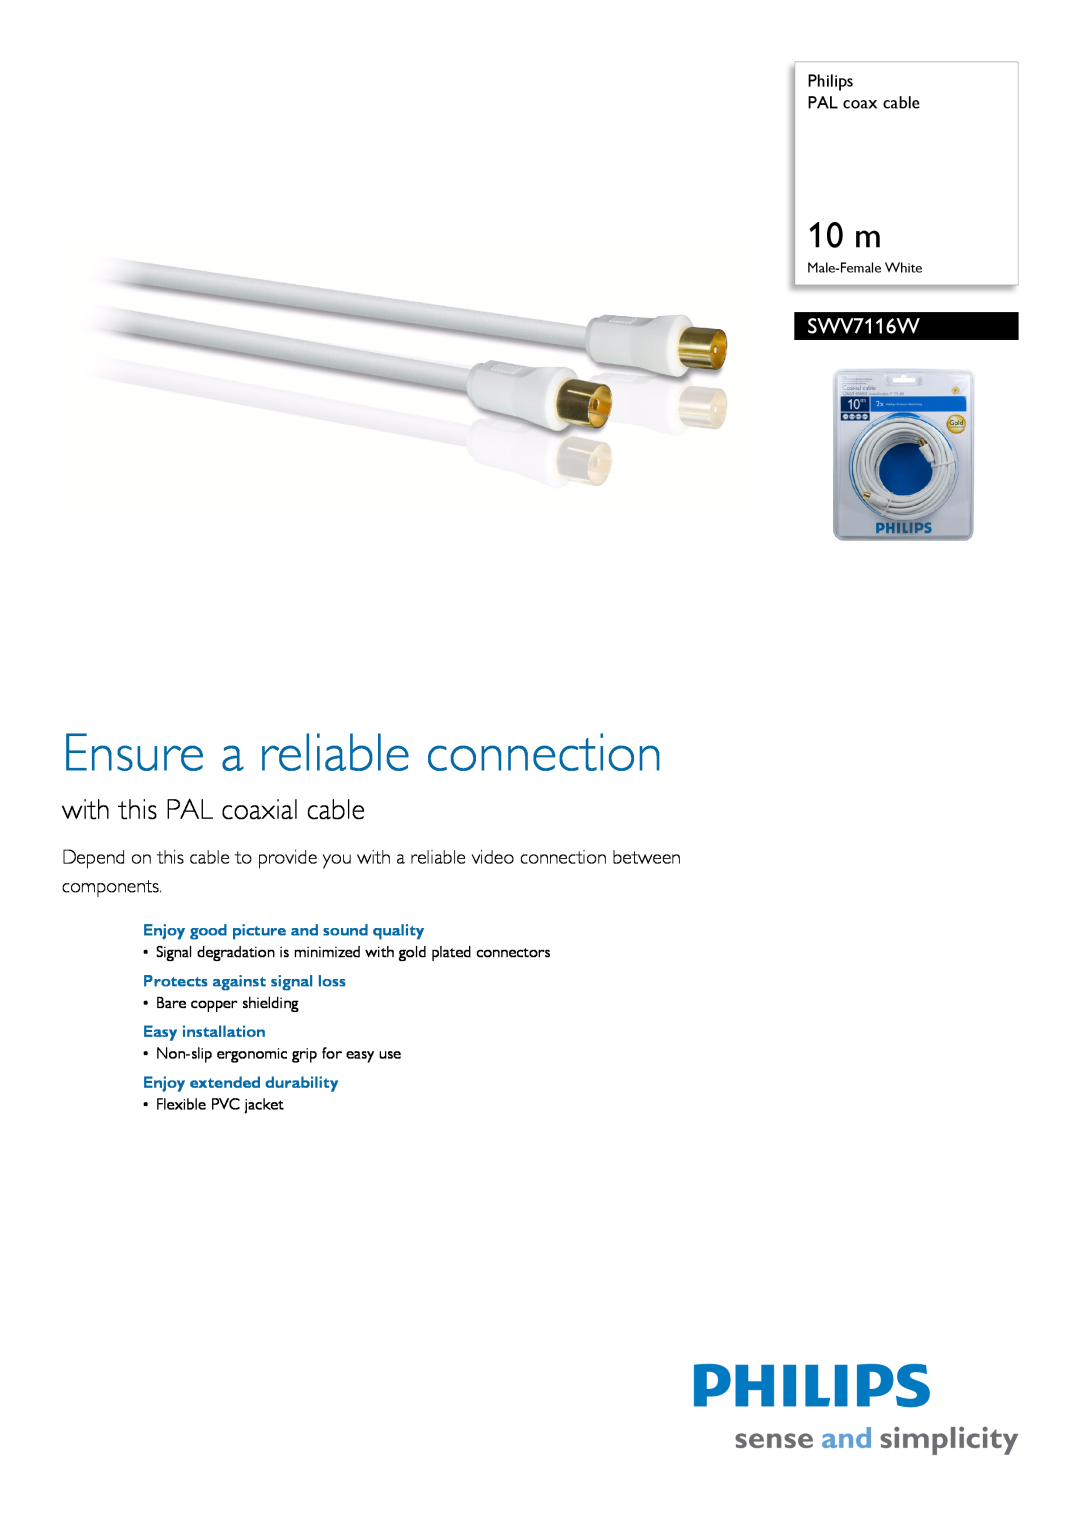 Philips SWV7116W manual Philips PAL coax cable, Enjoy good picture and sound quality, Protects against signal loss, 10 m 